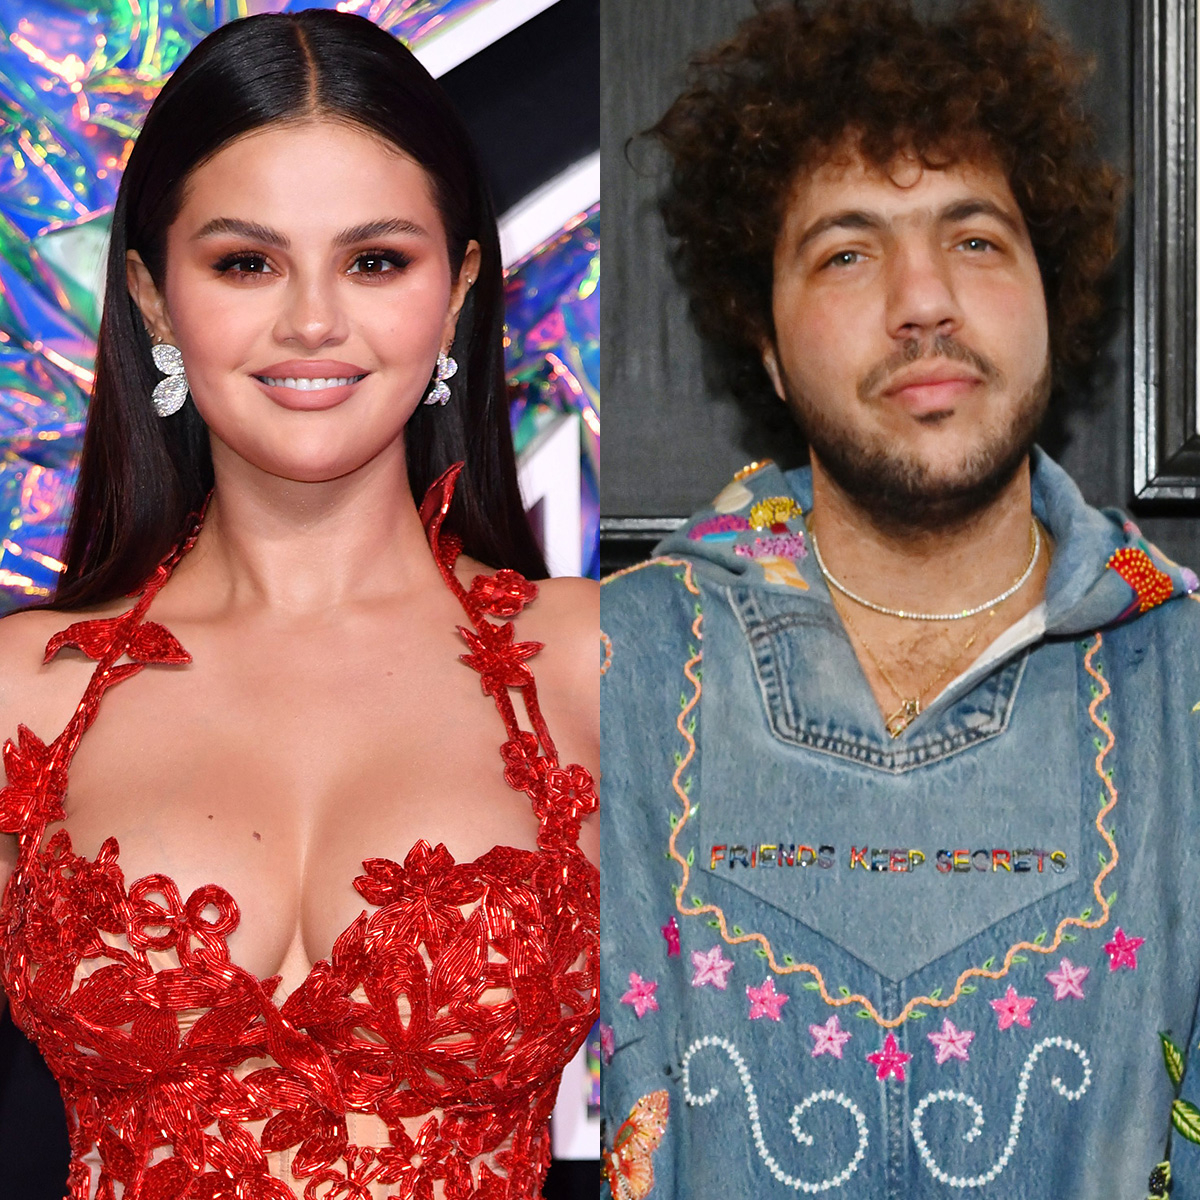 Come and check out Selena Gomez's photos of her date with Benny Blanco